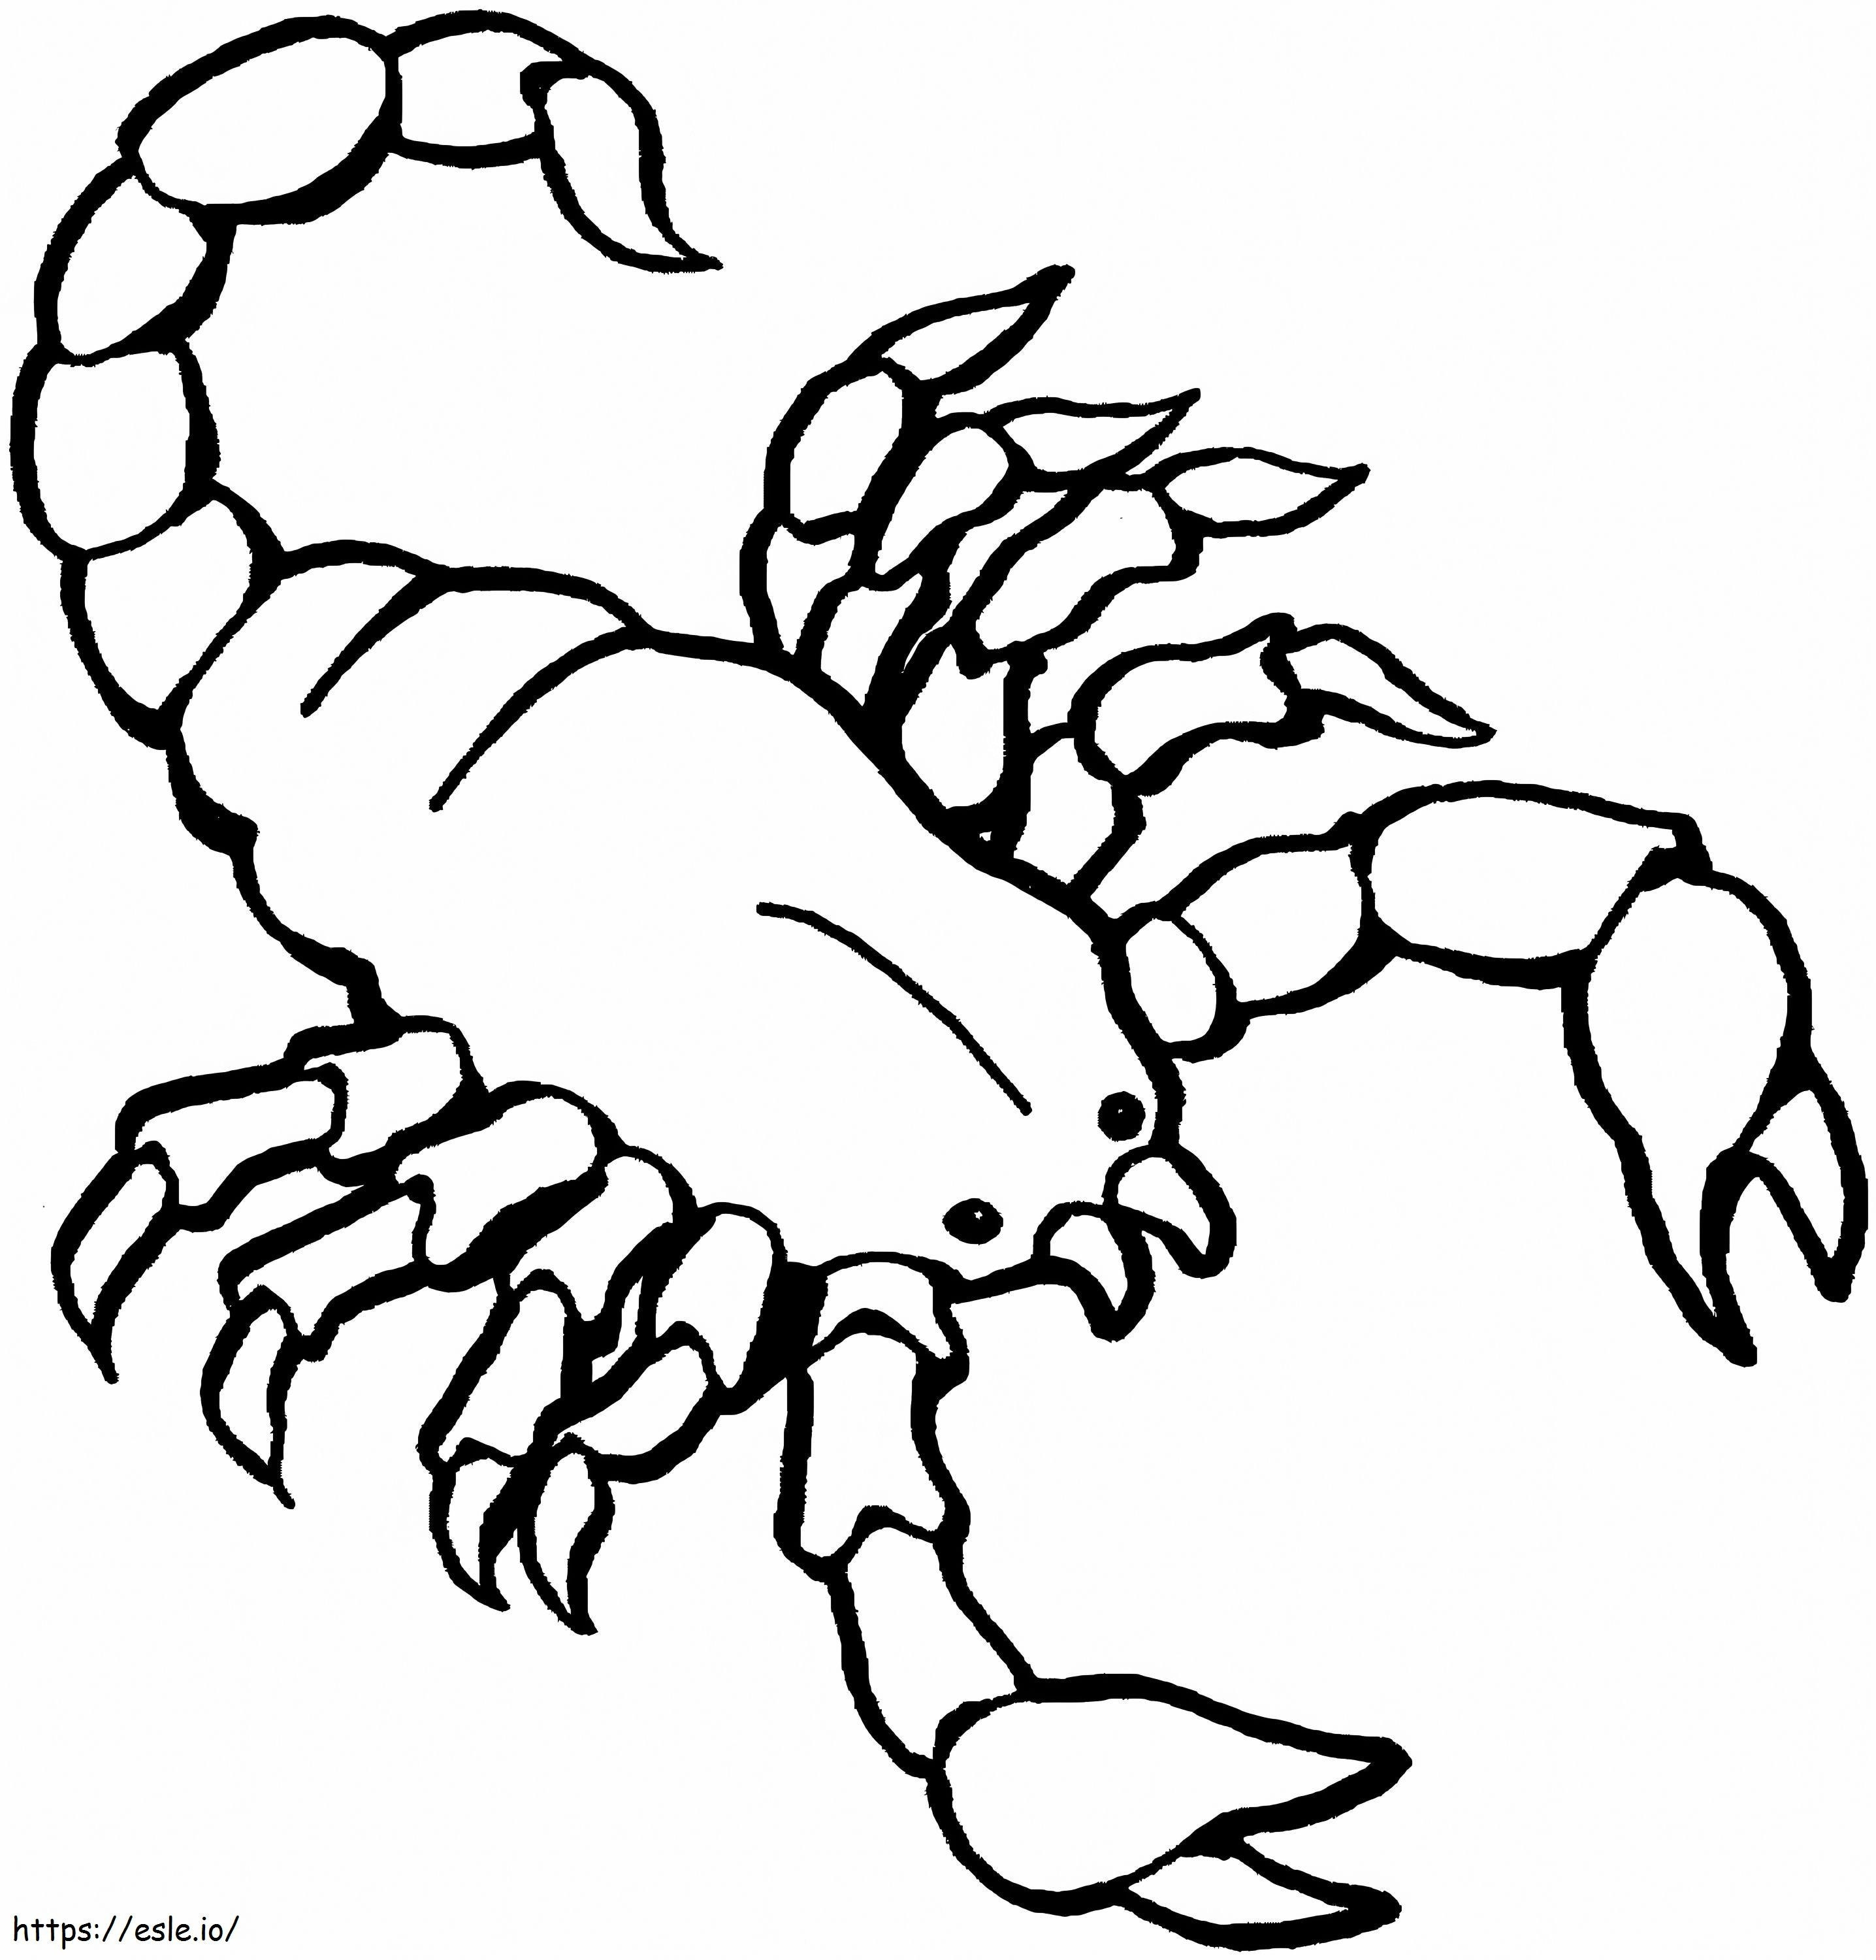 Scorpion To Color coloring page